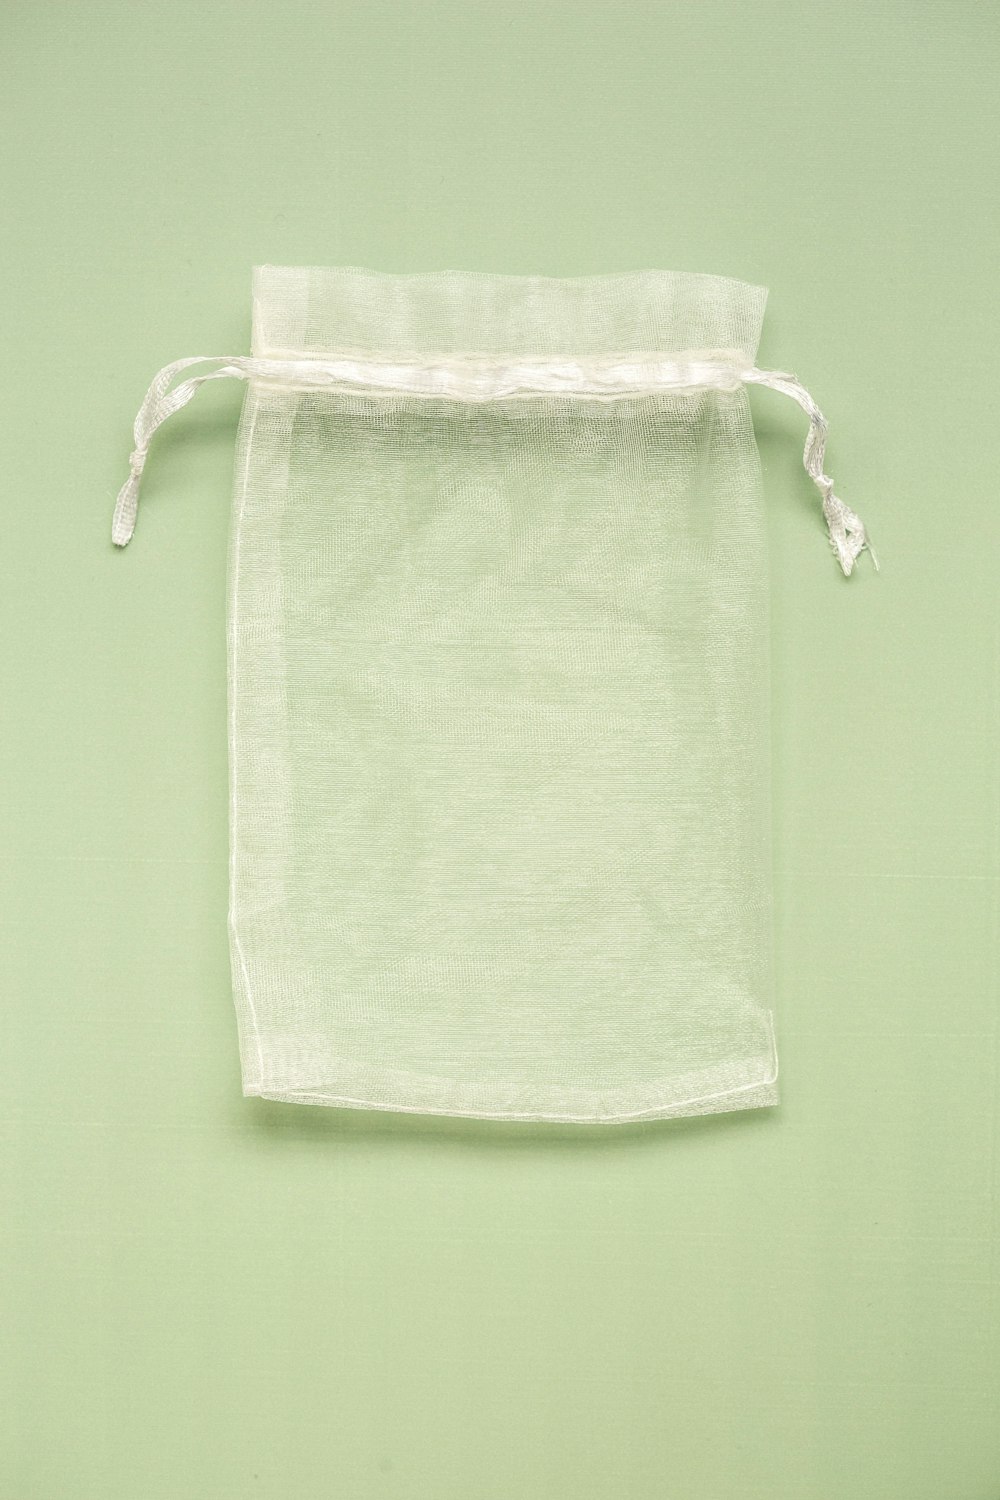 a white linen bag hanging on a green wall